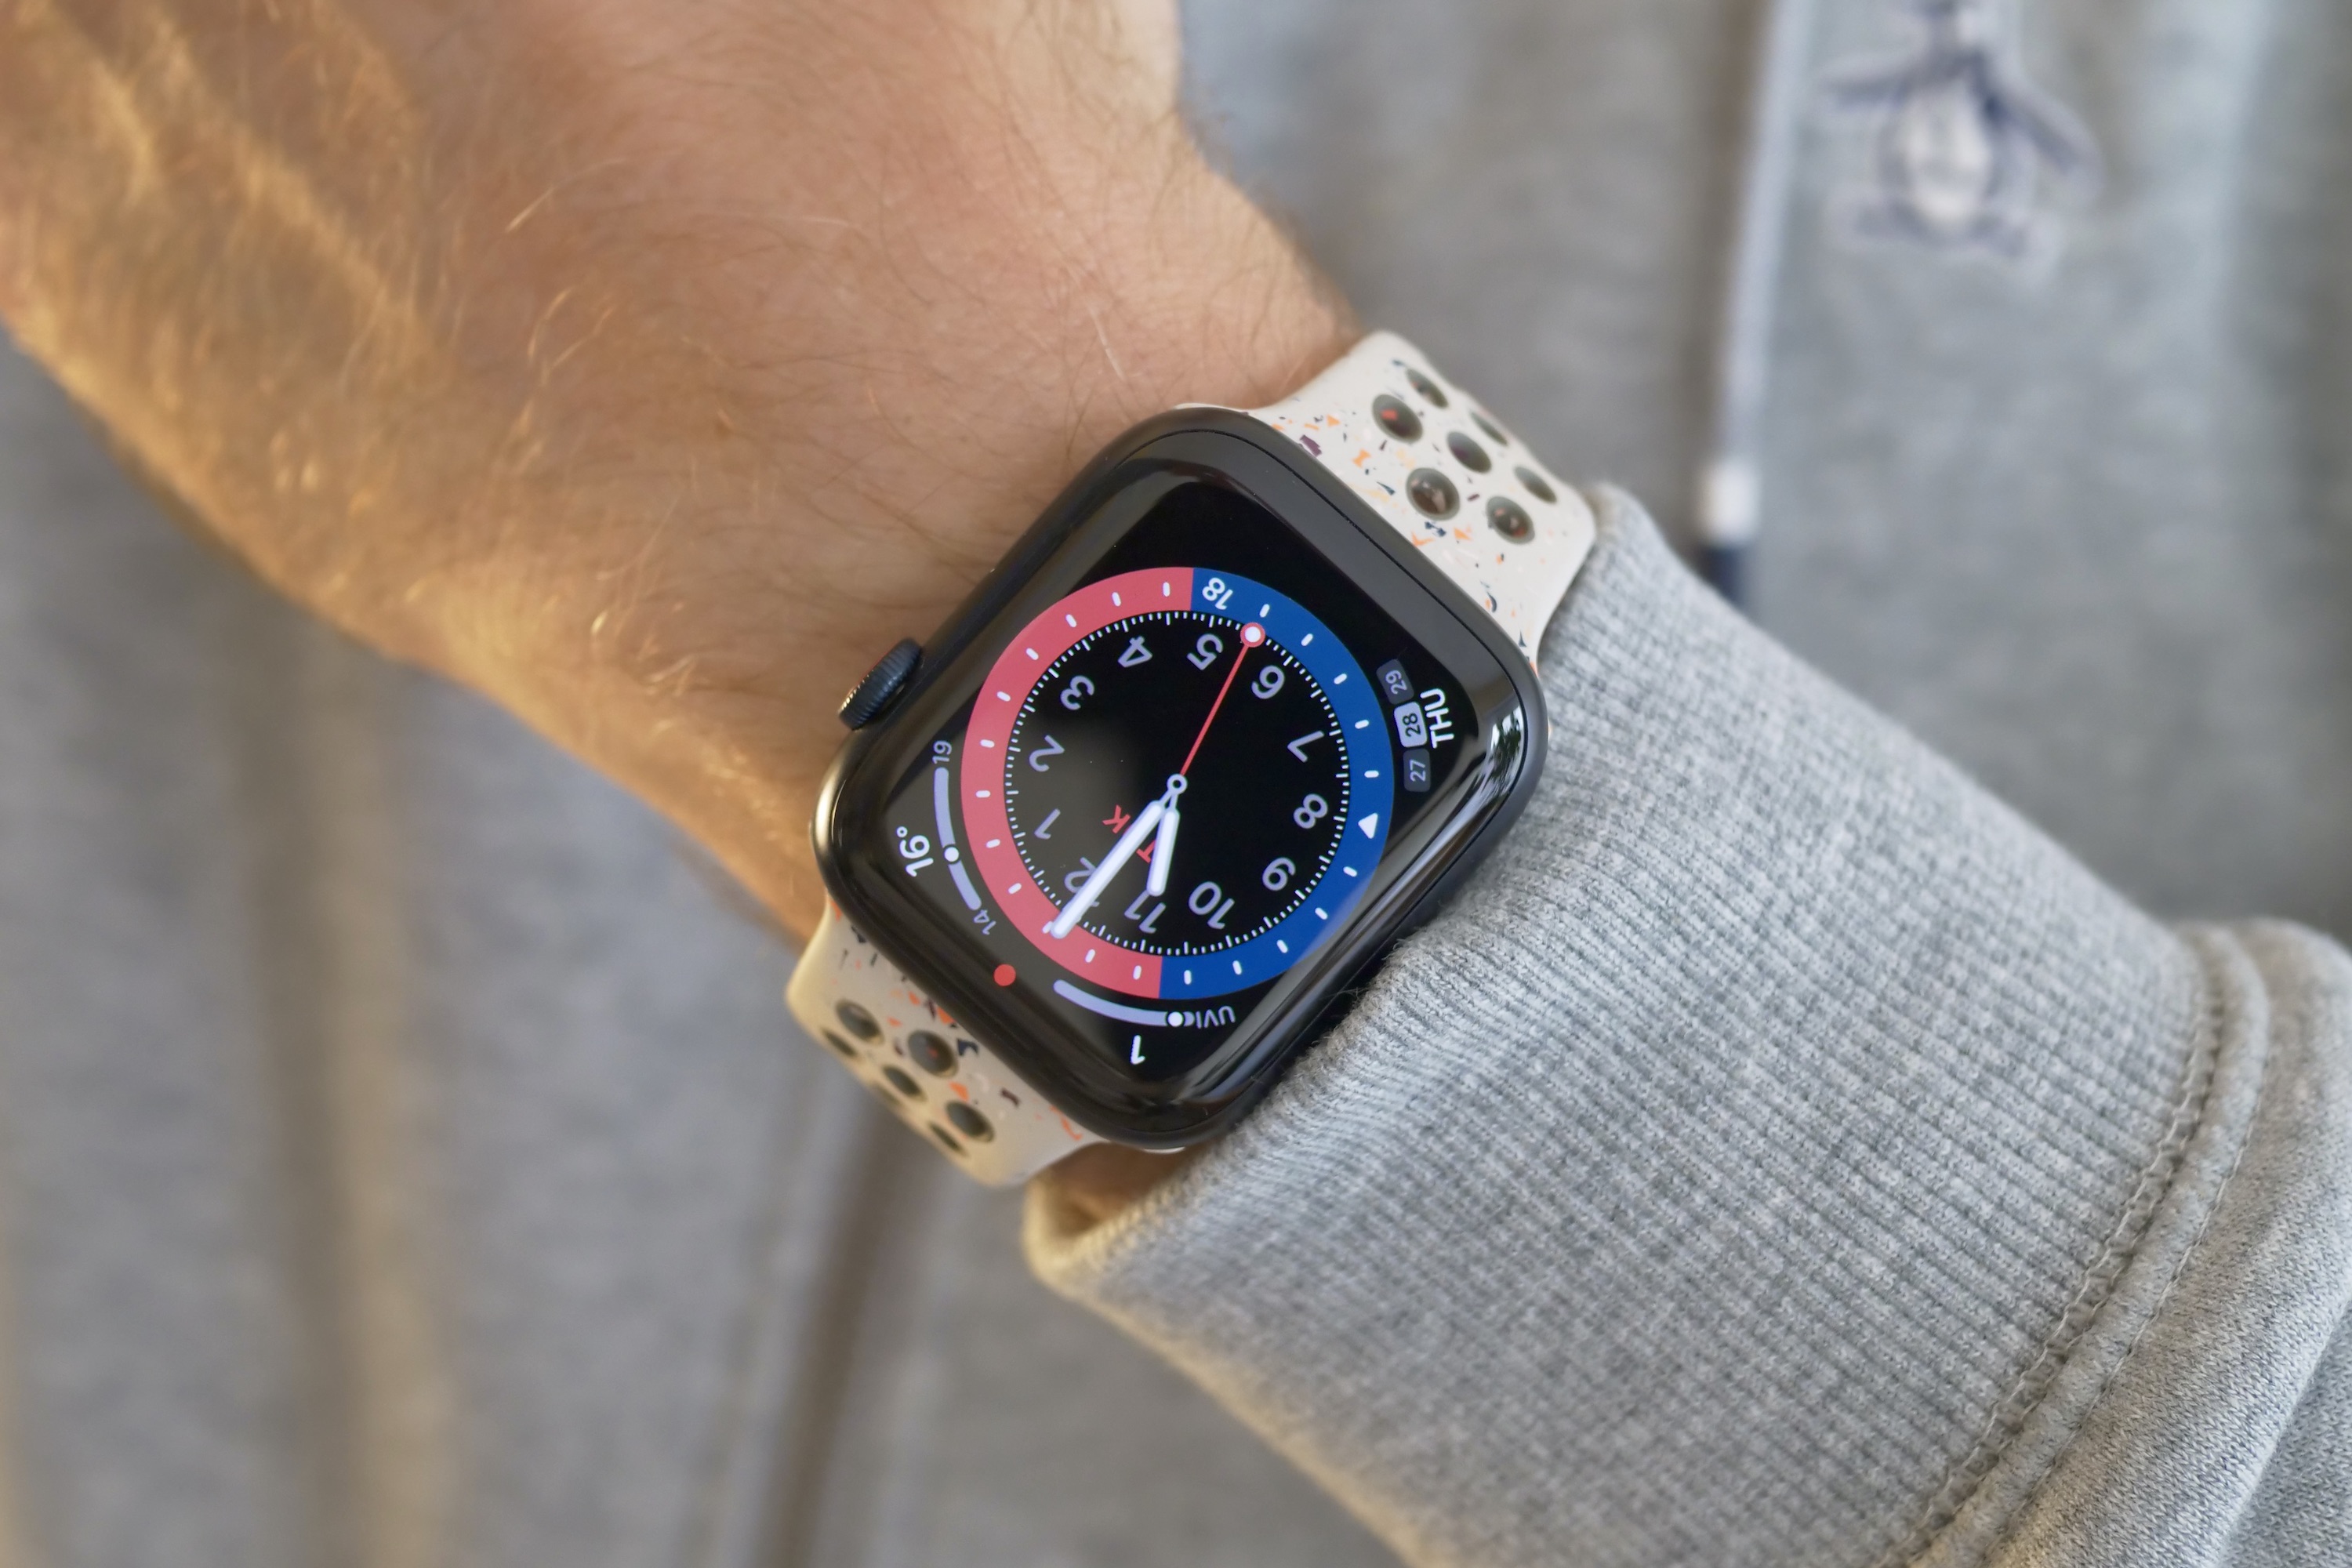 Apple Watch Series 9 review: why you should buy it right now | Digital  Trends